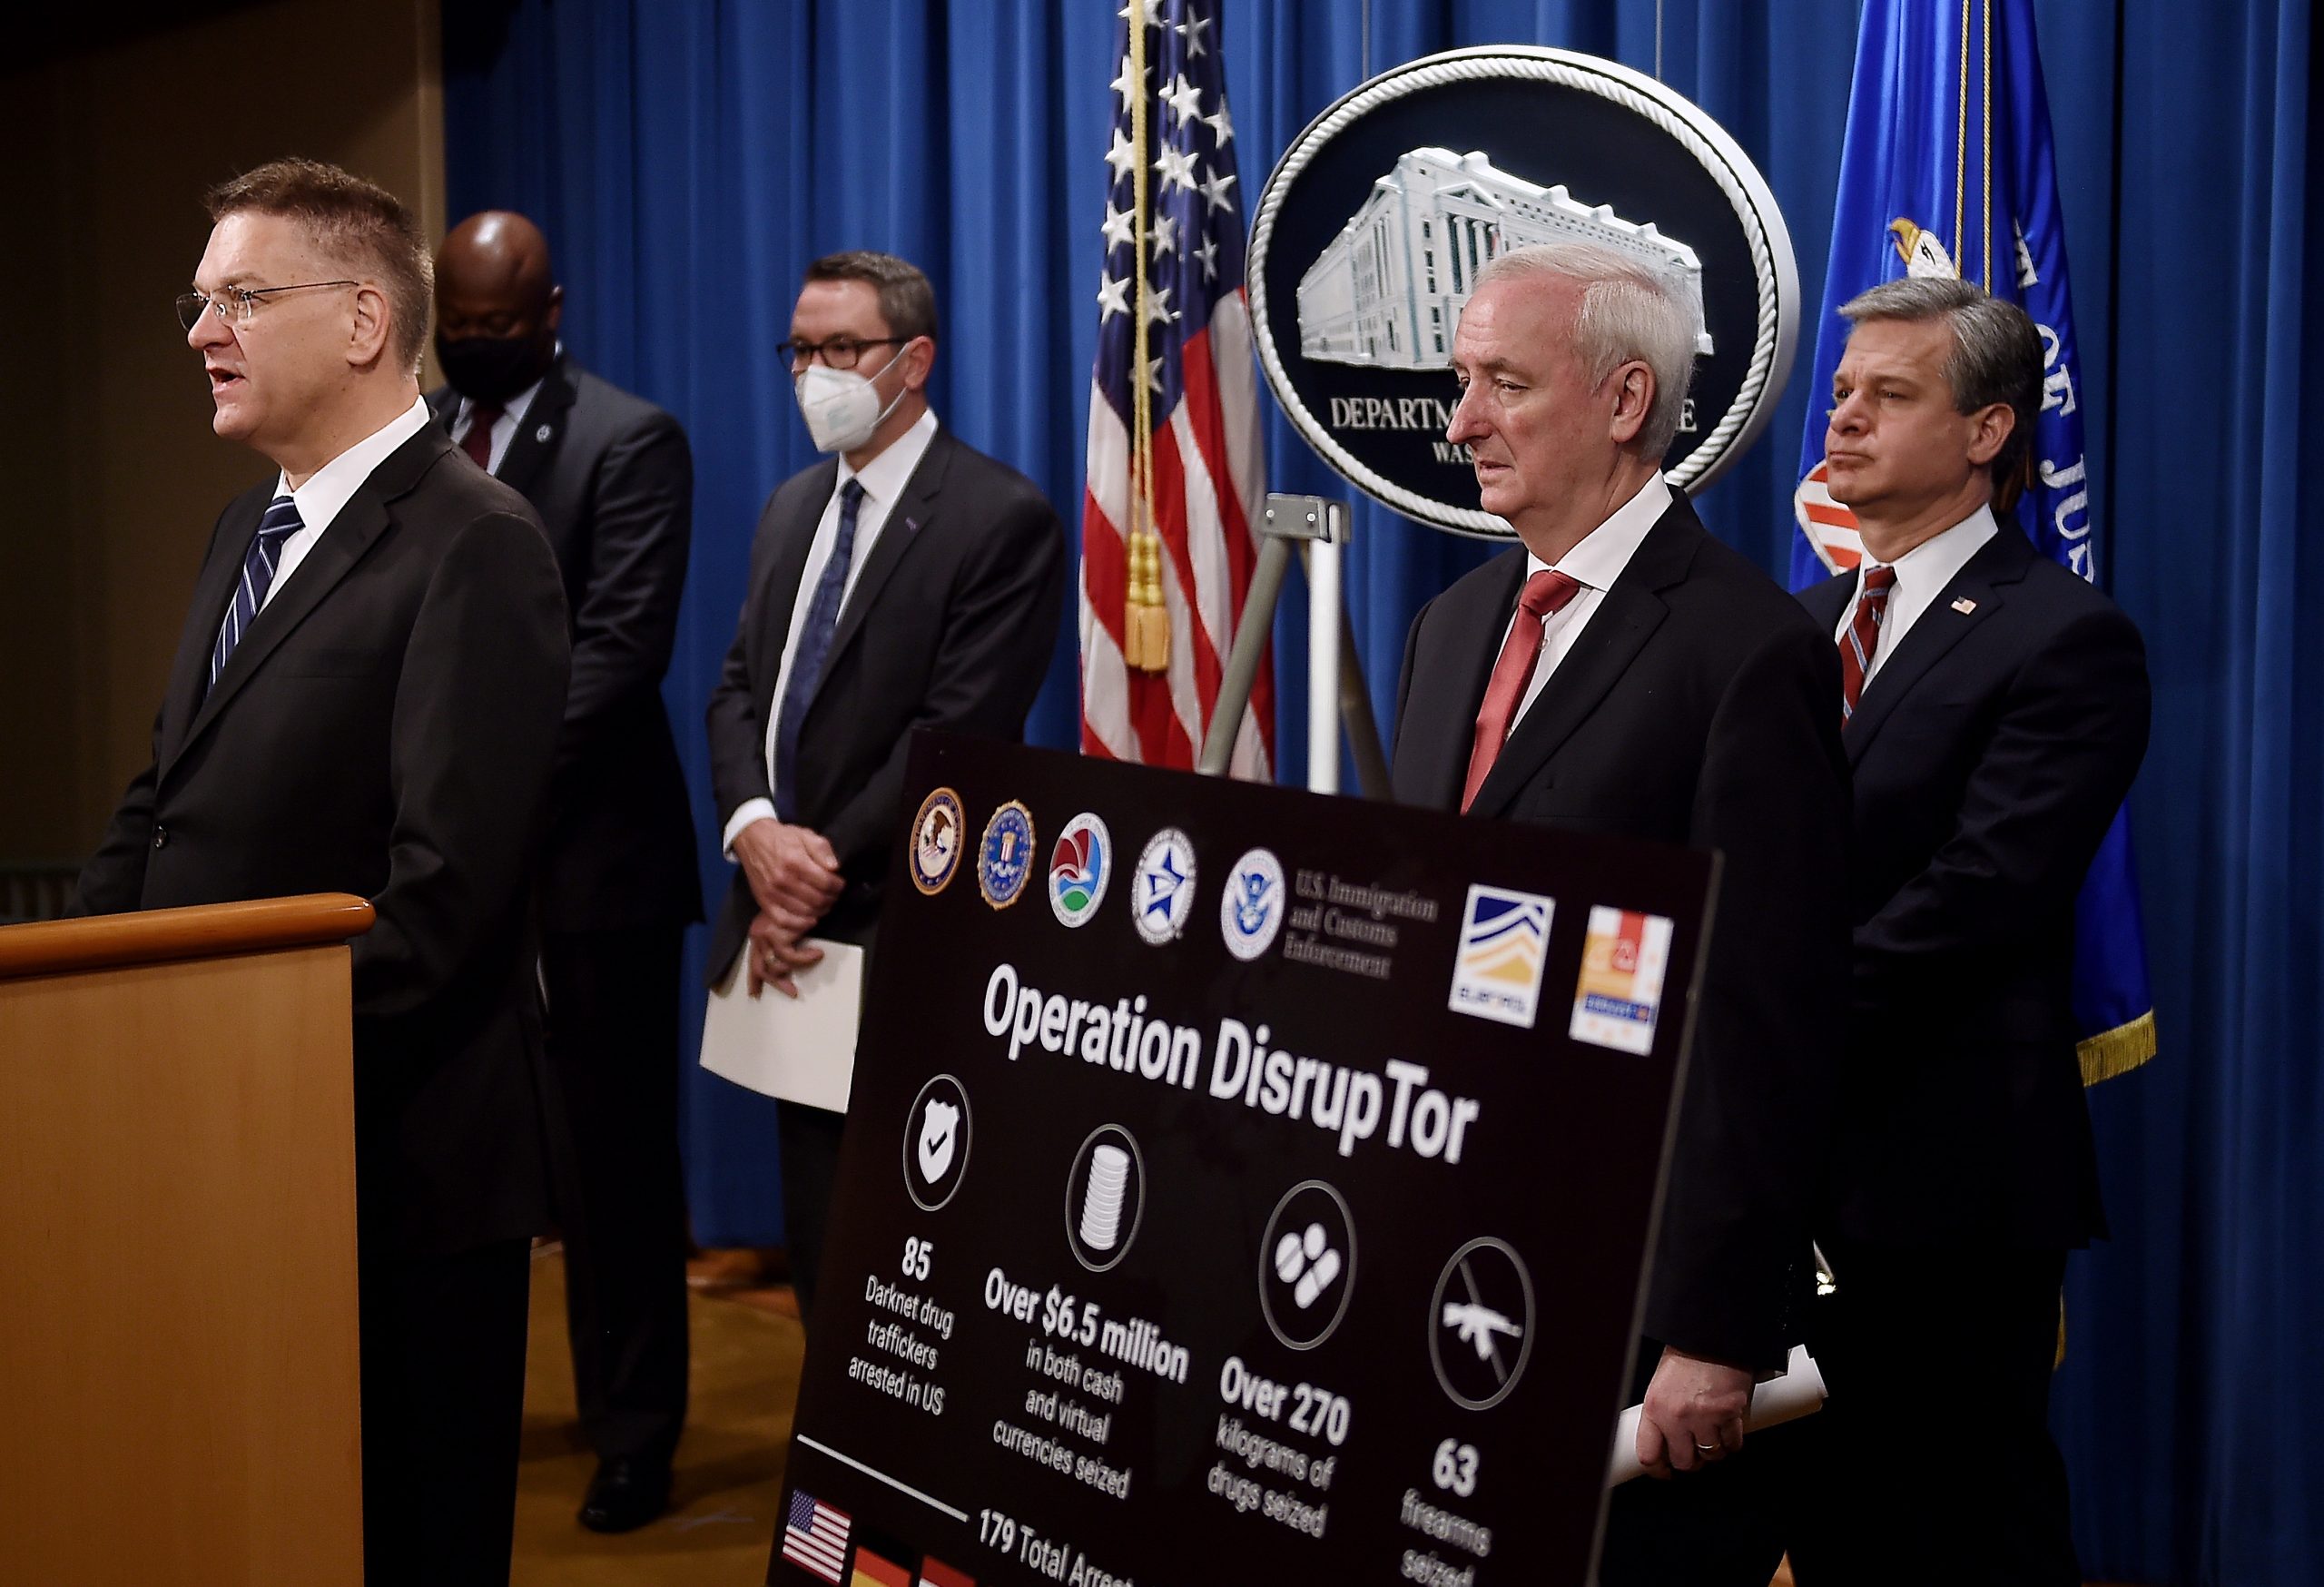 epa08688414 (L to R) DEA Acting Administrator Timothy Shea,  Chief Postal Inspector Gary Barksdale, ICE Acting Deputy Director Derek Benner, Deputy Attorney General Jeffrey A. Rosen, and Federal Bureau of Investigation Director Christopher Wray, announce significant law enforcement actions related to the illegal sale of drugs and other illicit goods and services on the Darknet during a press conference at the Department of Justice in Washington, DC, USA, 22 September 2020.  EPA/OLIVIER DOULIERY / POOL